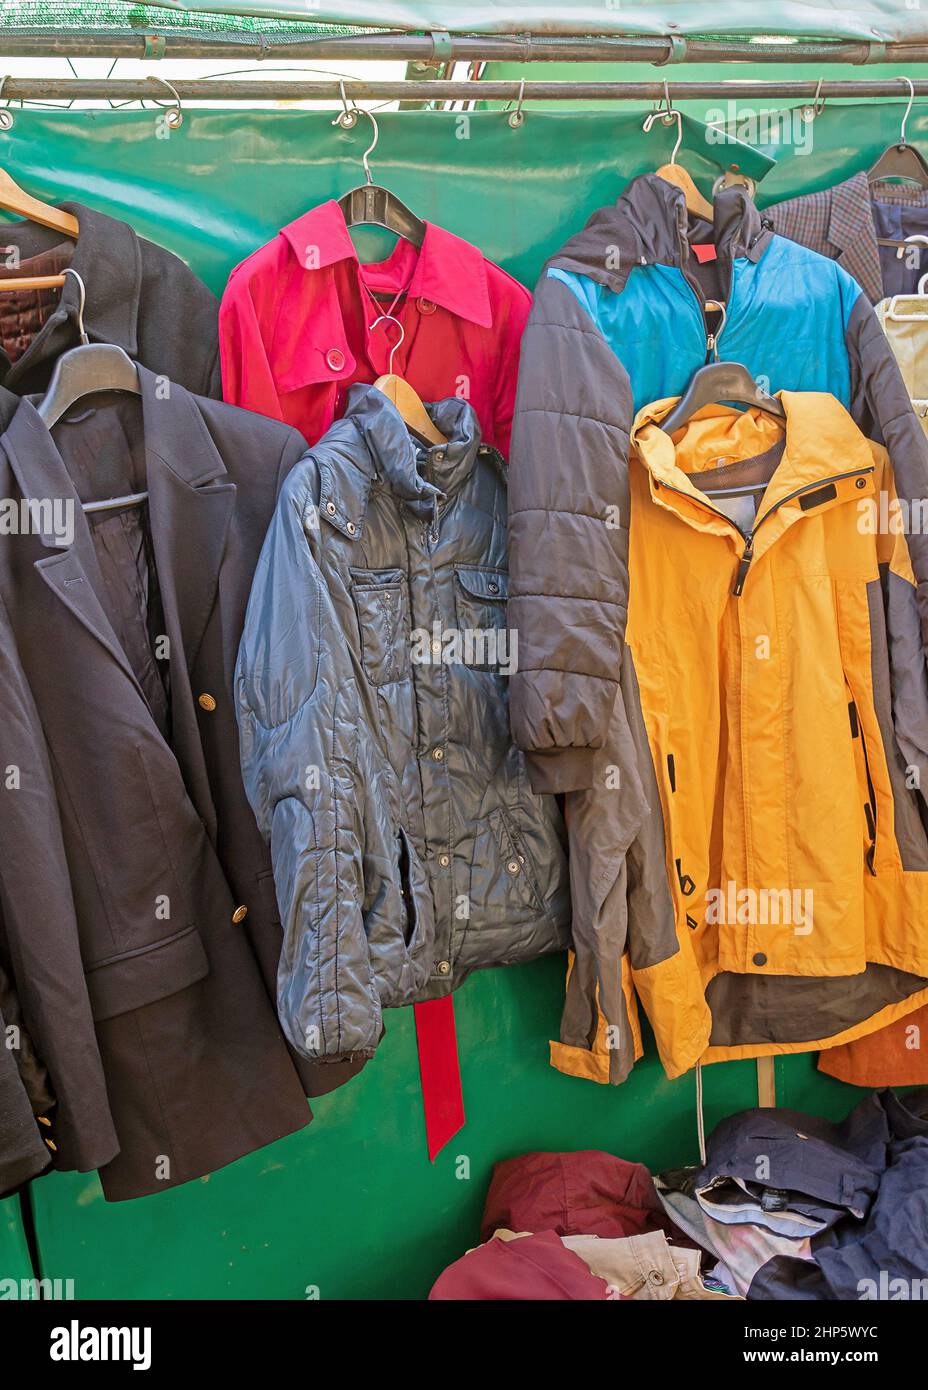 Colorful warm jackets with waterproof materials as protection from rain and snow sold on market during cold weather Stock Photo